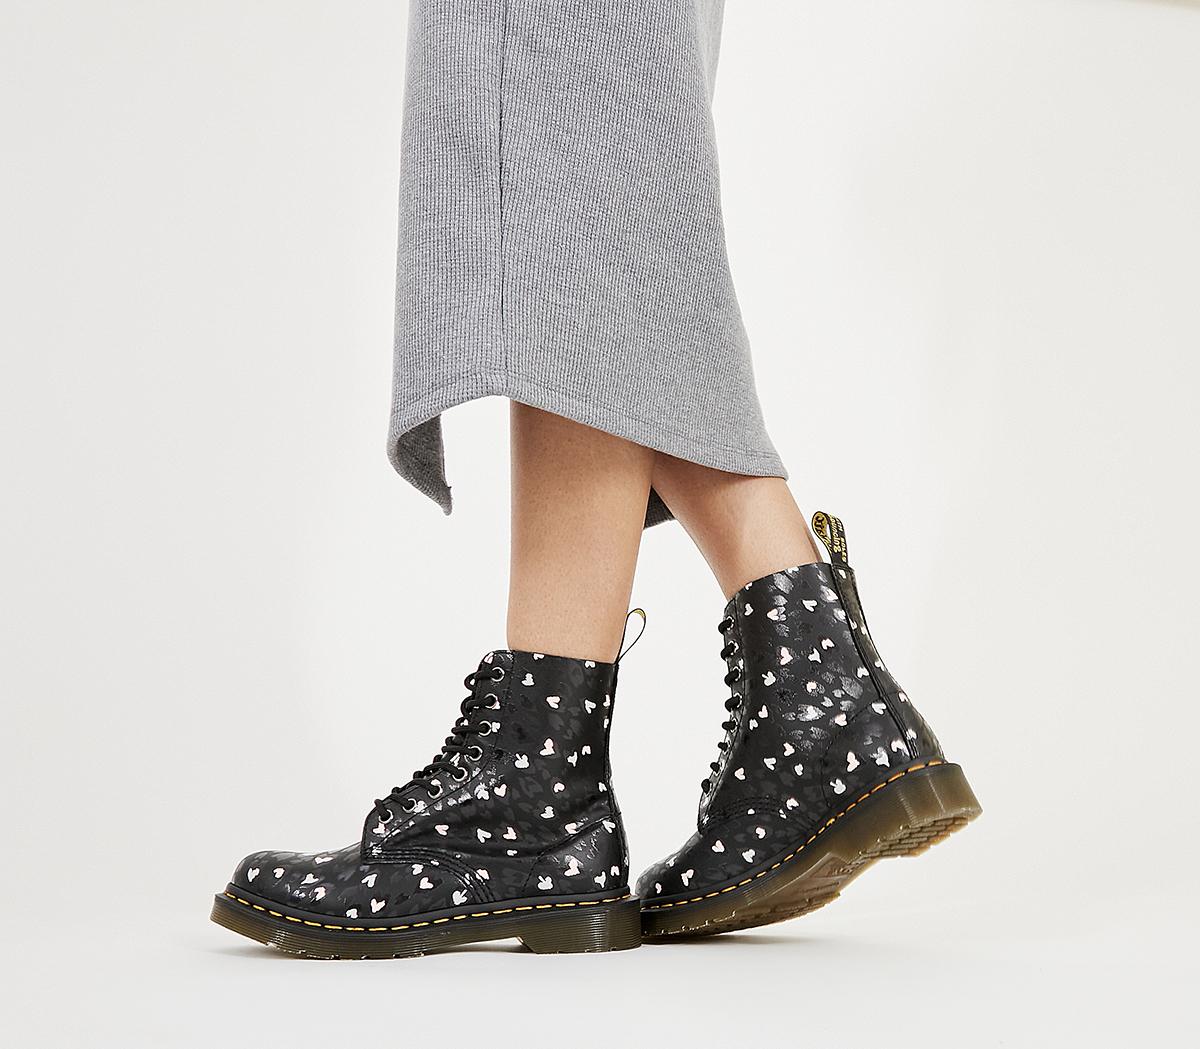 Dr. Martens 8 Eyelet Lace Up Boots 